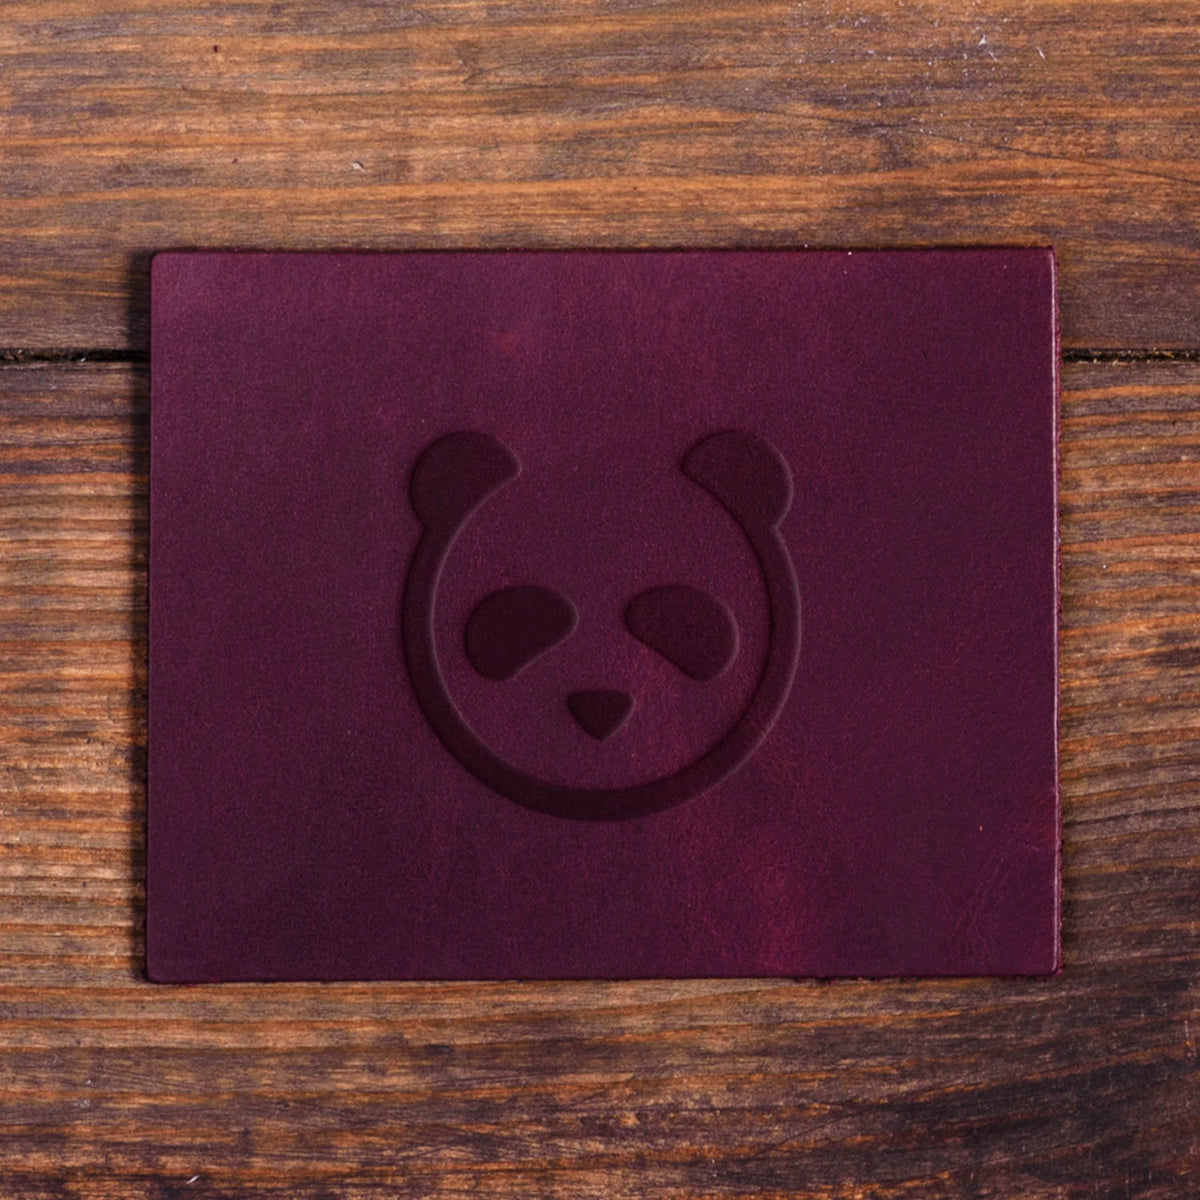 Panda Delrin Leather Stamp